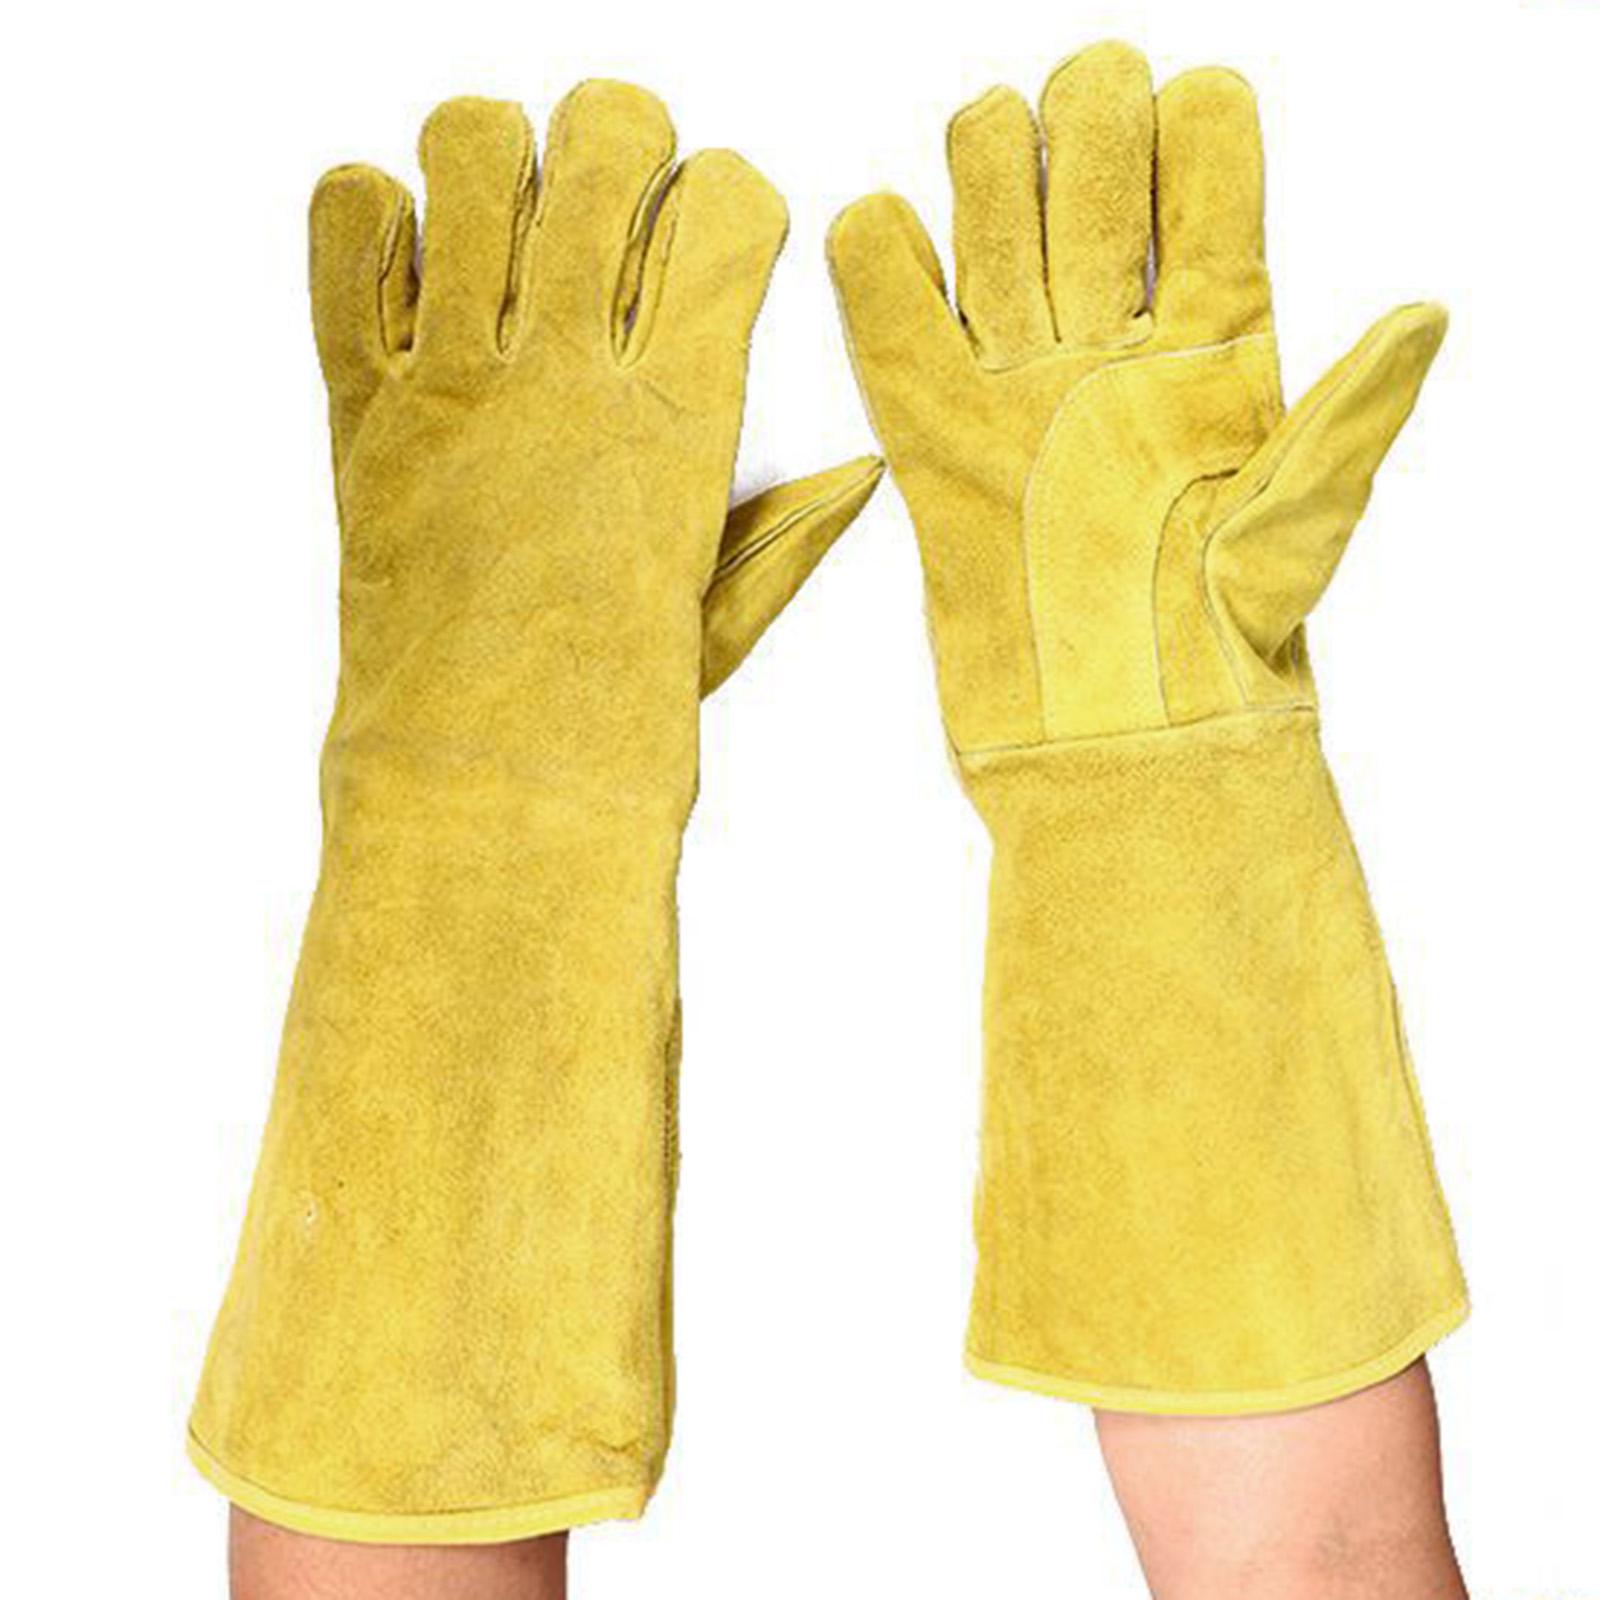 MIG Welding Gloves Cowhide Leather Wood Stoves Welder Cooking Yellow